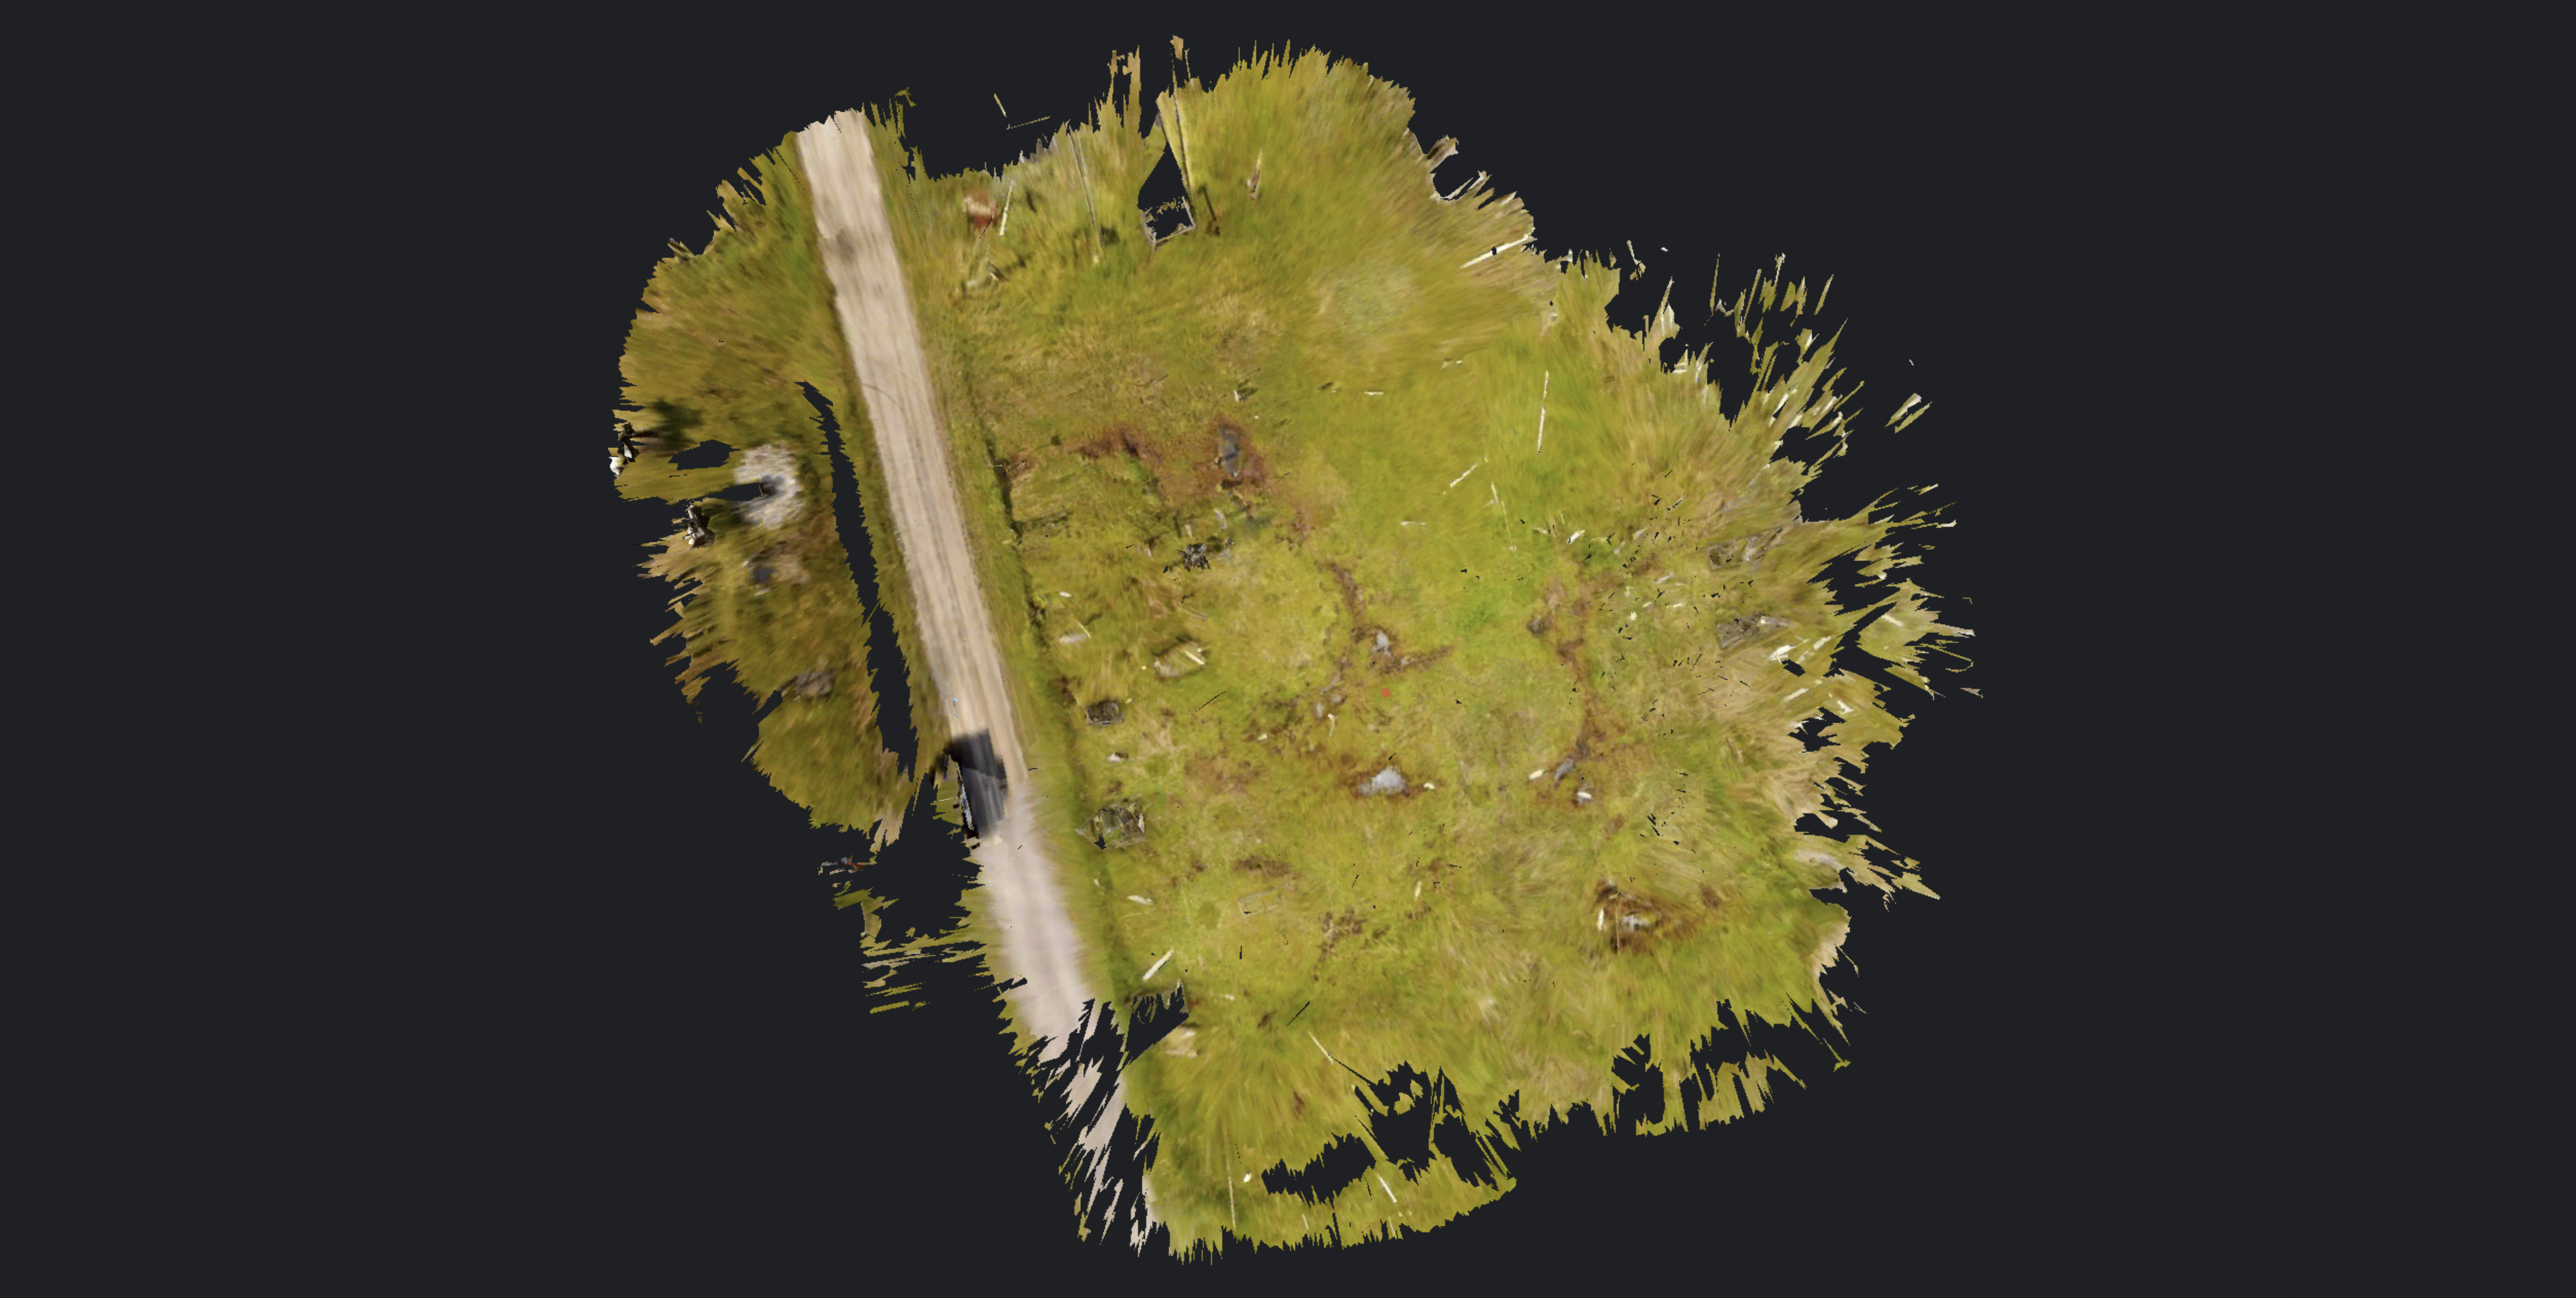 Olaf Kuhlke. Rendering of a section of the Nome City Cemetery experiencing subsidence due to permafrost thaw. Computer-generated from over 30 individual 3-D images showing thaw patterns of permafrost.